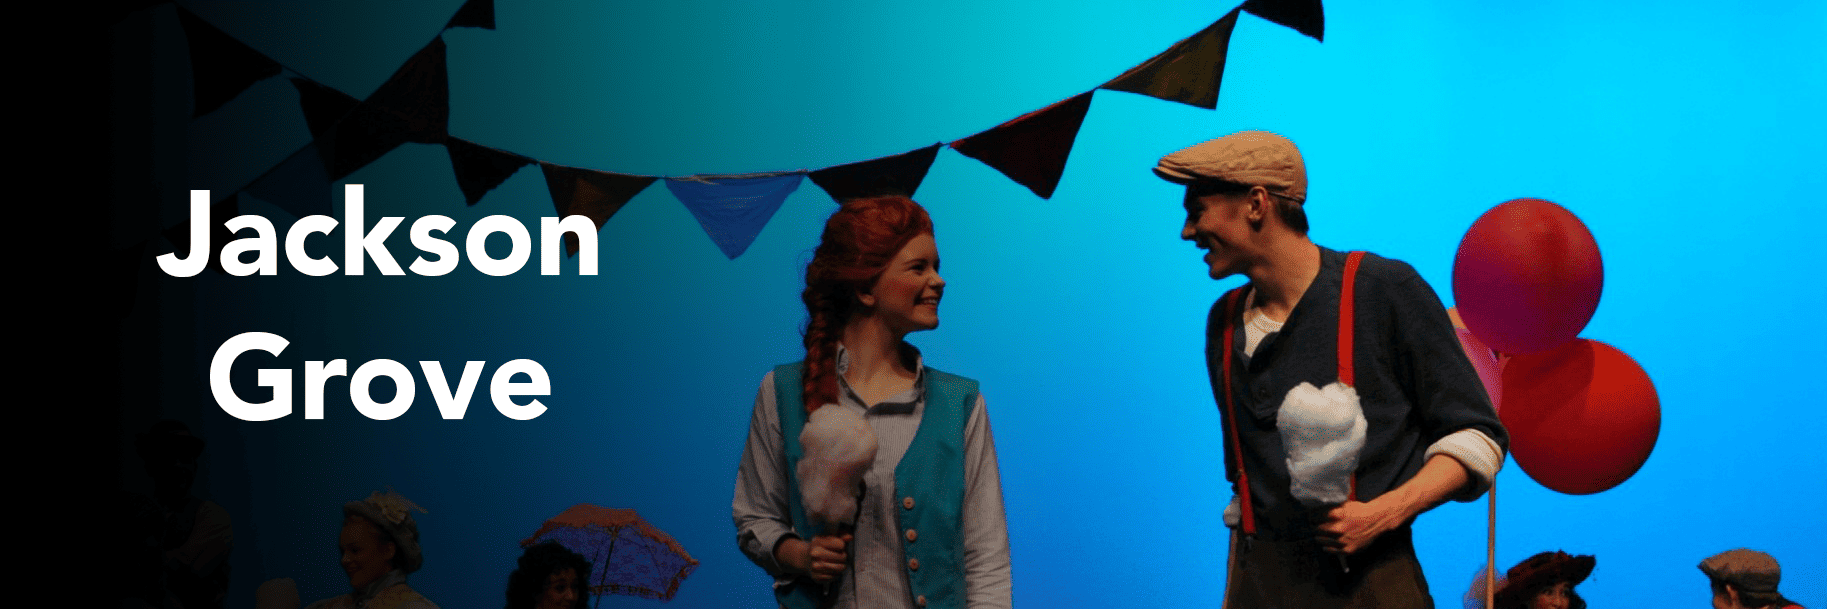 Jackson Grove, acting on stage with a woman, holding cotton candy and smiling. Jackson Grove name overlayed on image with black gradient on left side.